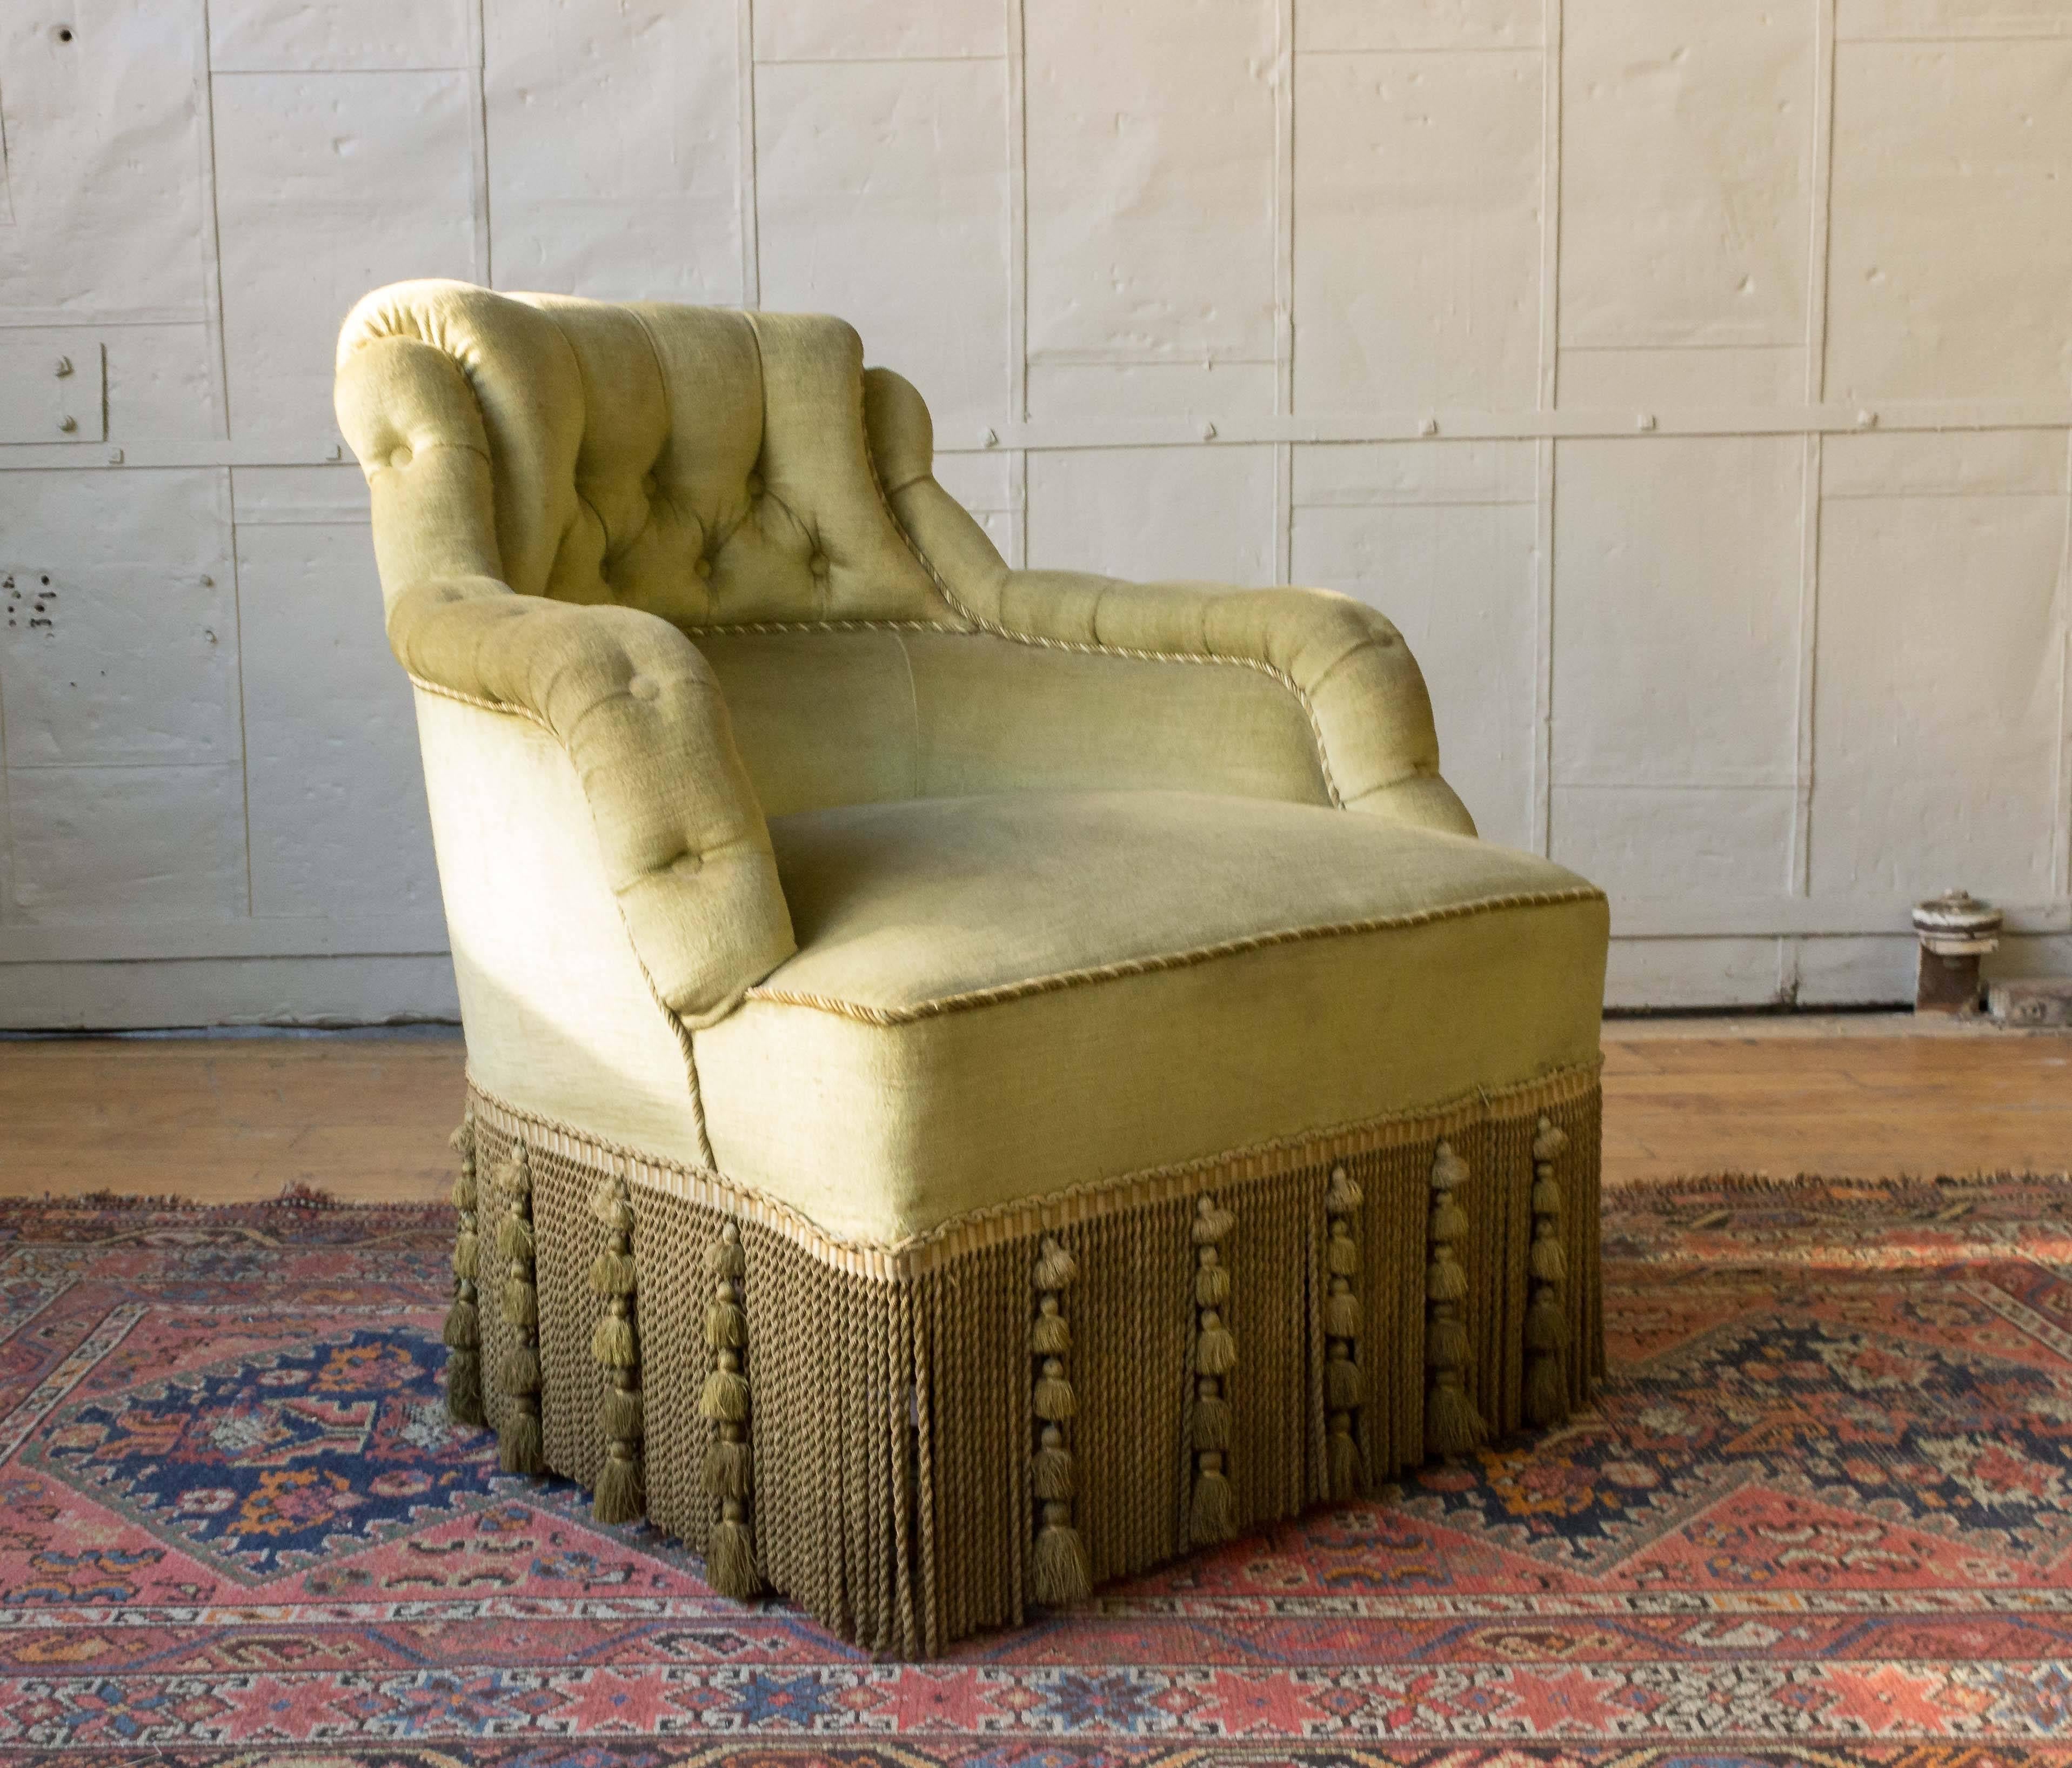 An exceptional French 19th century Napoleon III reading chair. This unique chair is upholstered in an elegant green-gold velvet, featuring intricate braided detailing, and elaborate decorative fringe that create a timeless, sophisticated look. The